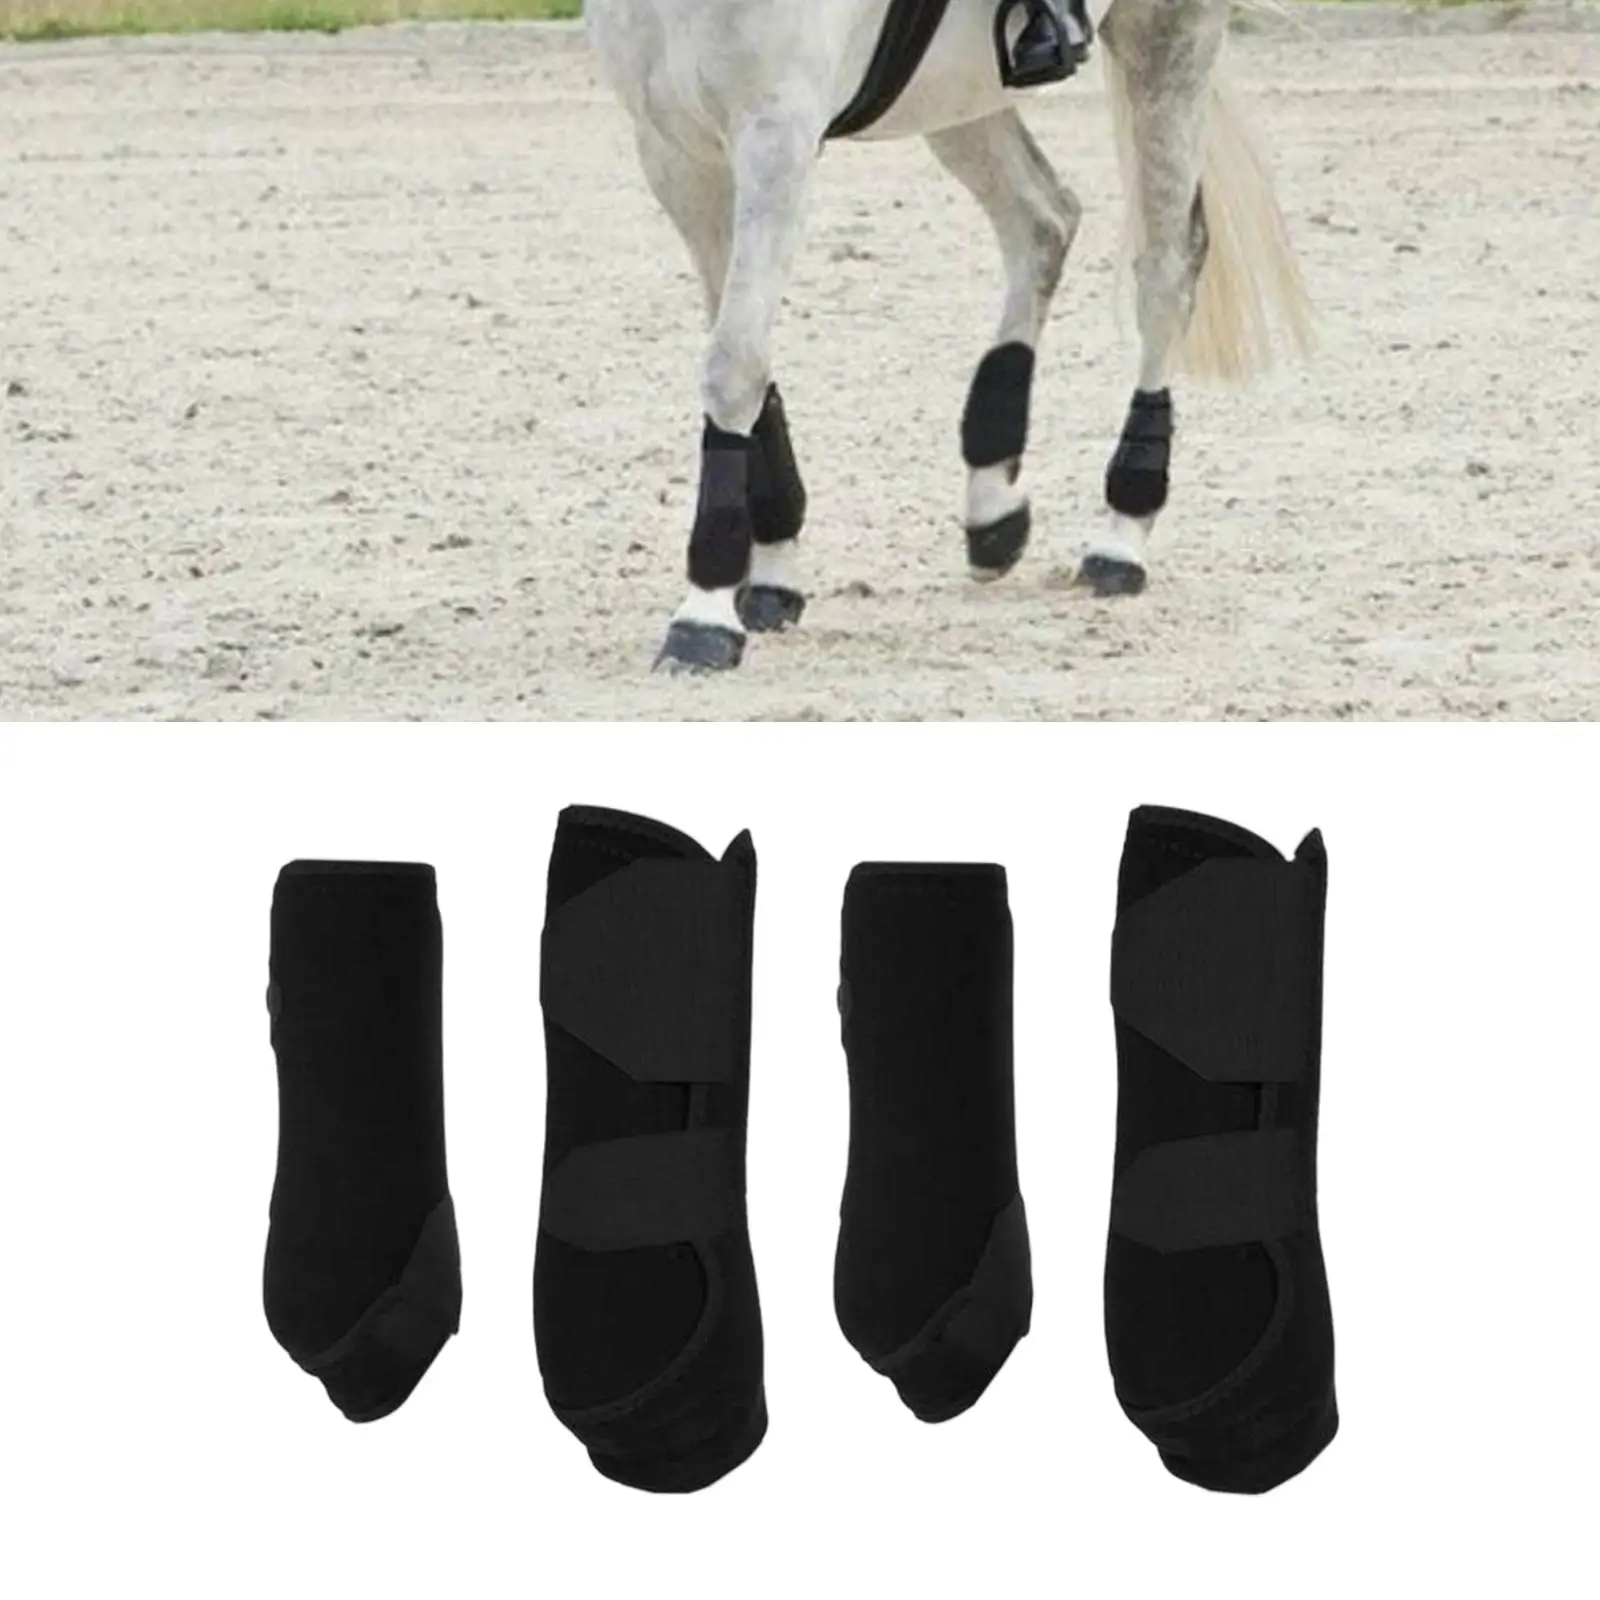 4Pcs Neoprene Horse Boots Leg Protection Wraps Shockproof Protector Front Hind Legs Guard for Riding Equestrian Accessories